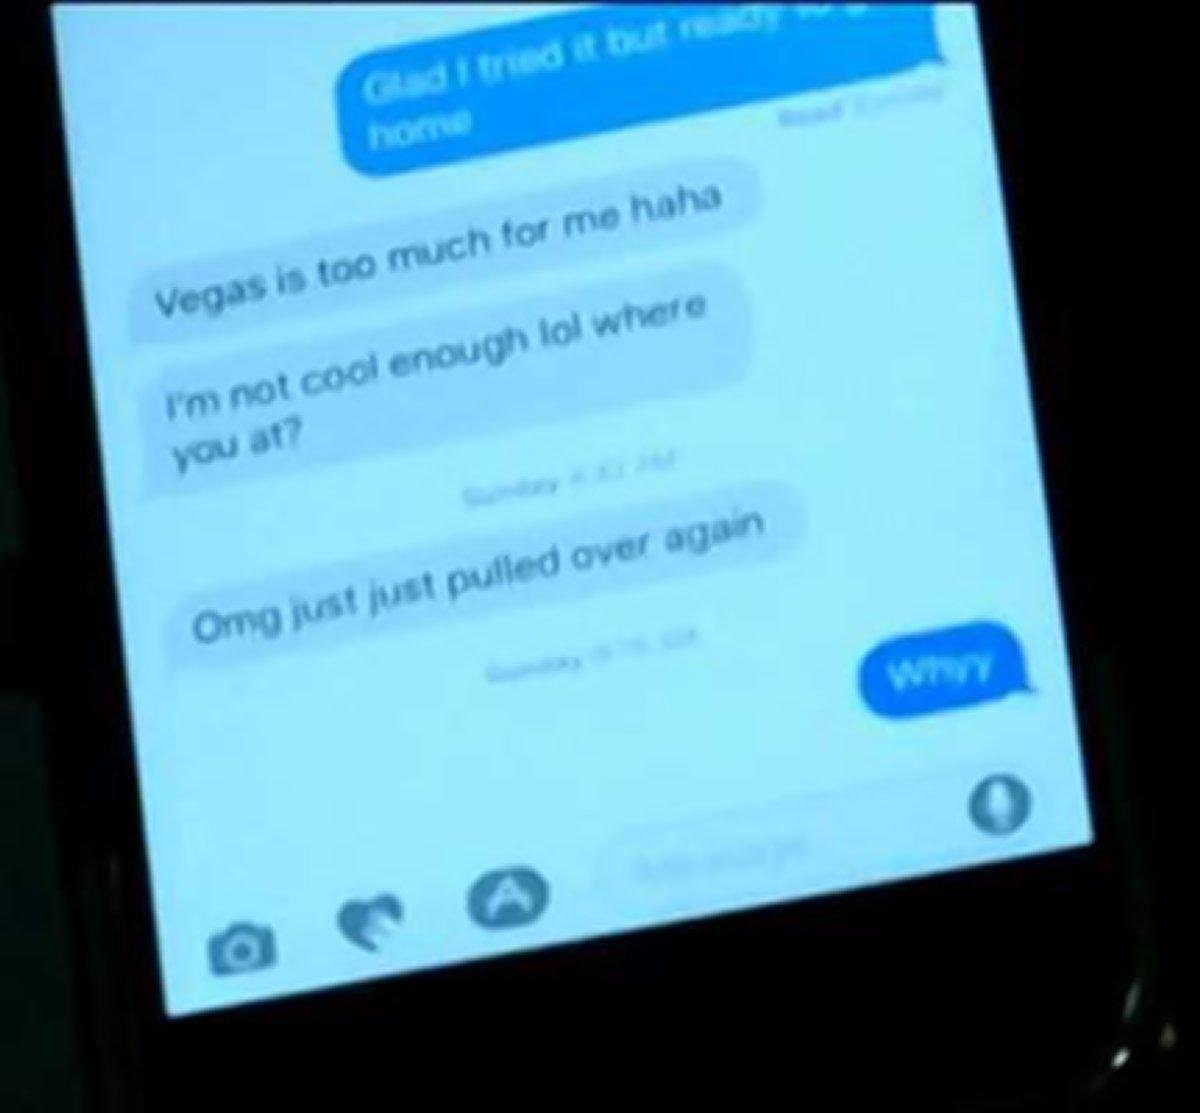 Anderson texted her boyfriend